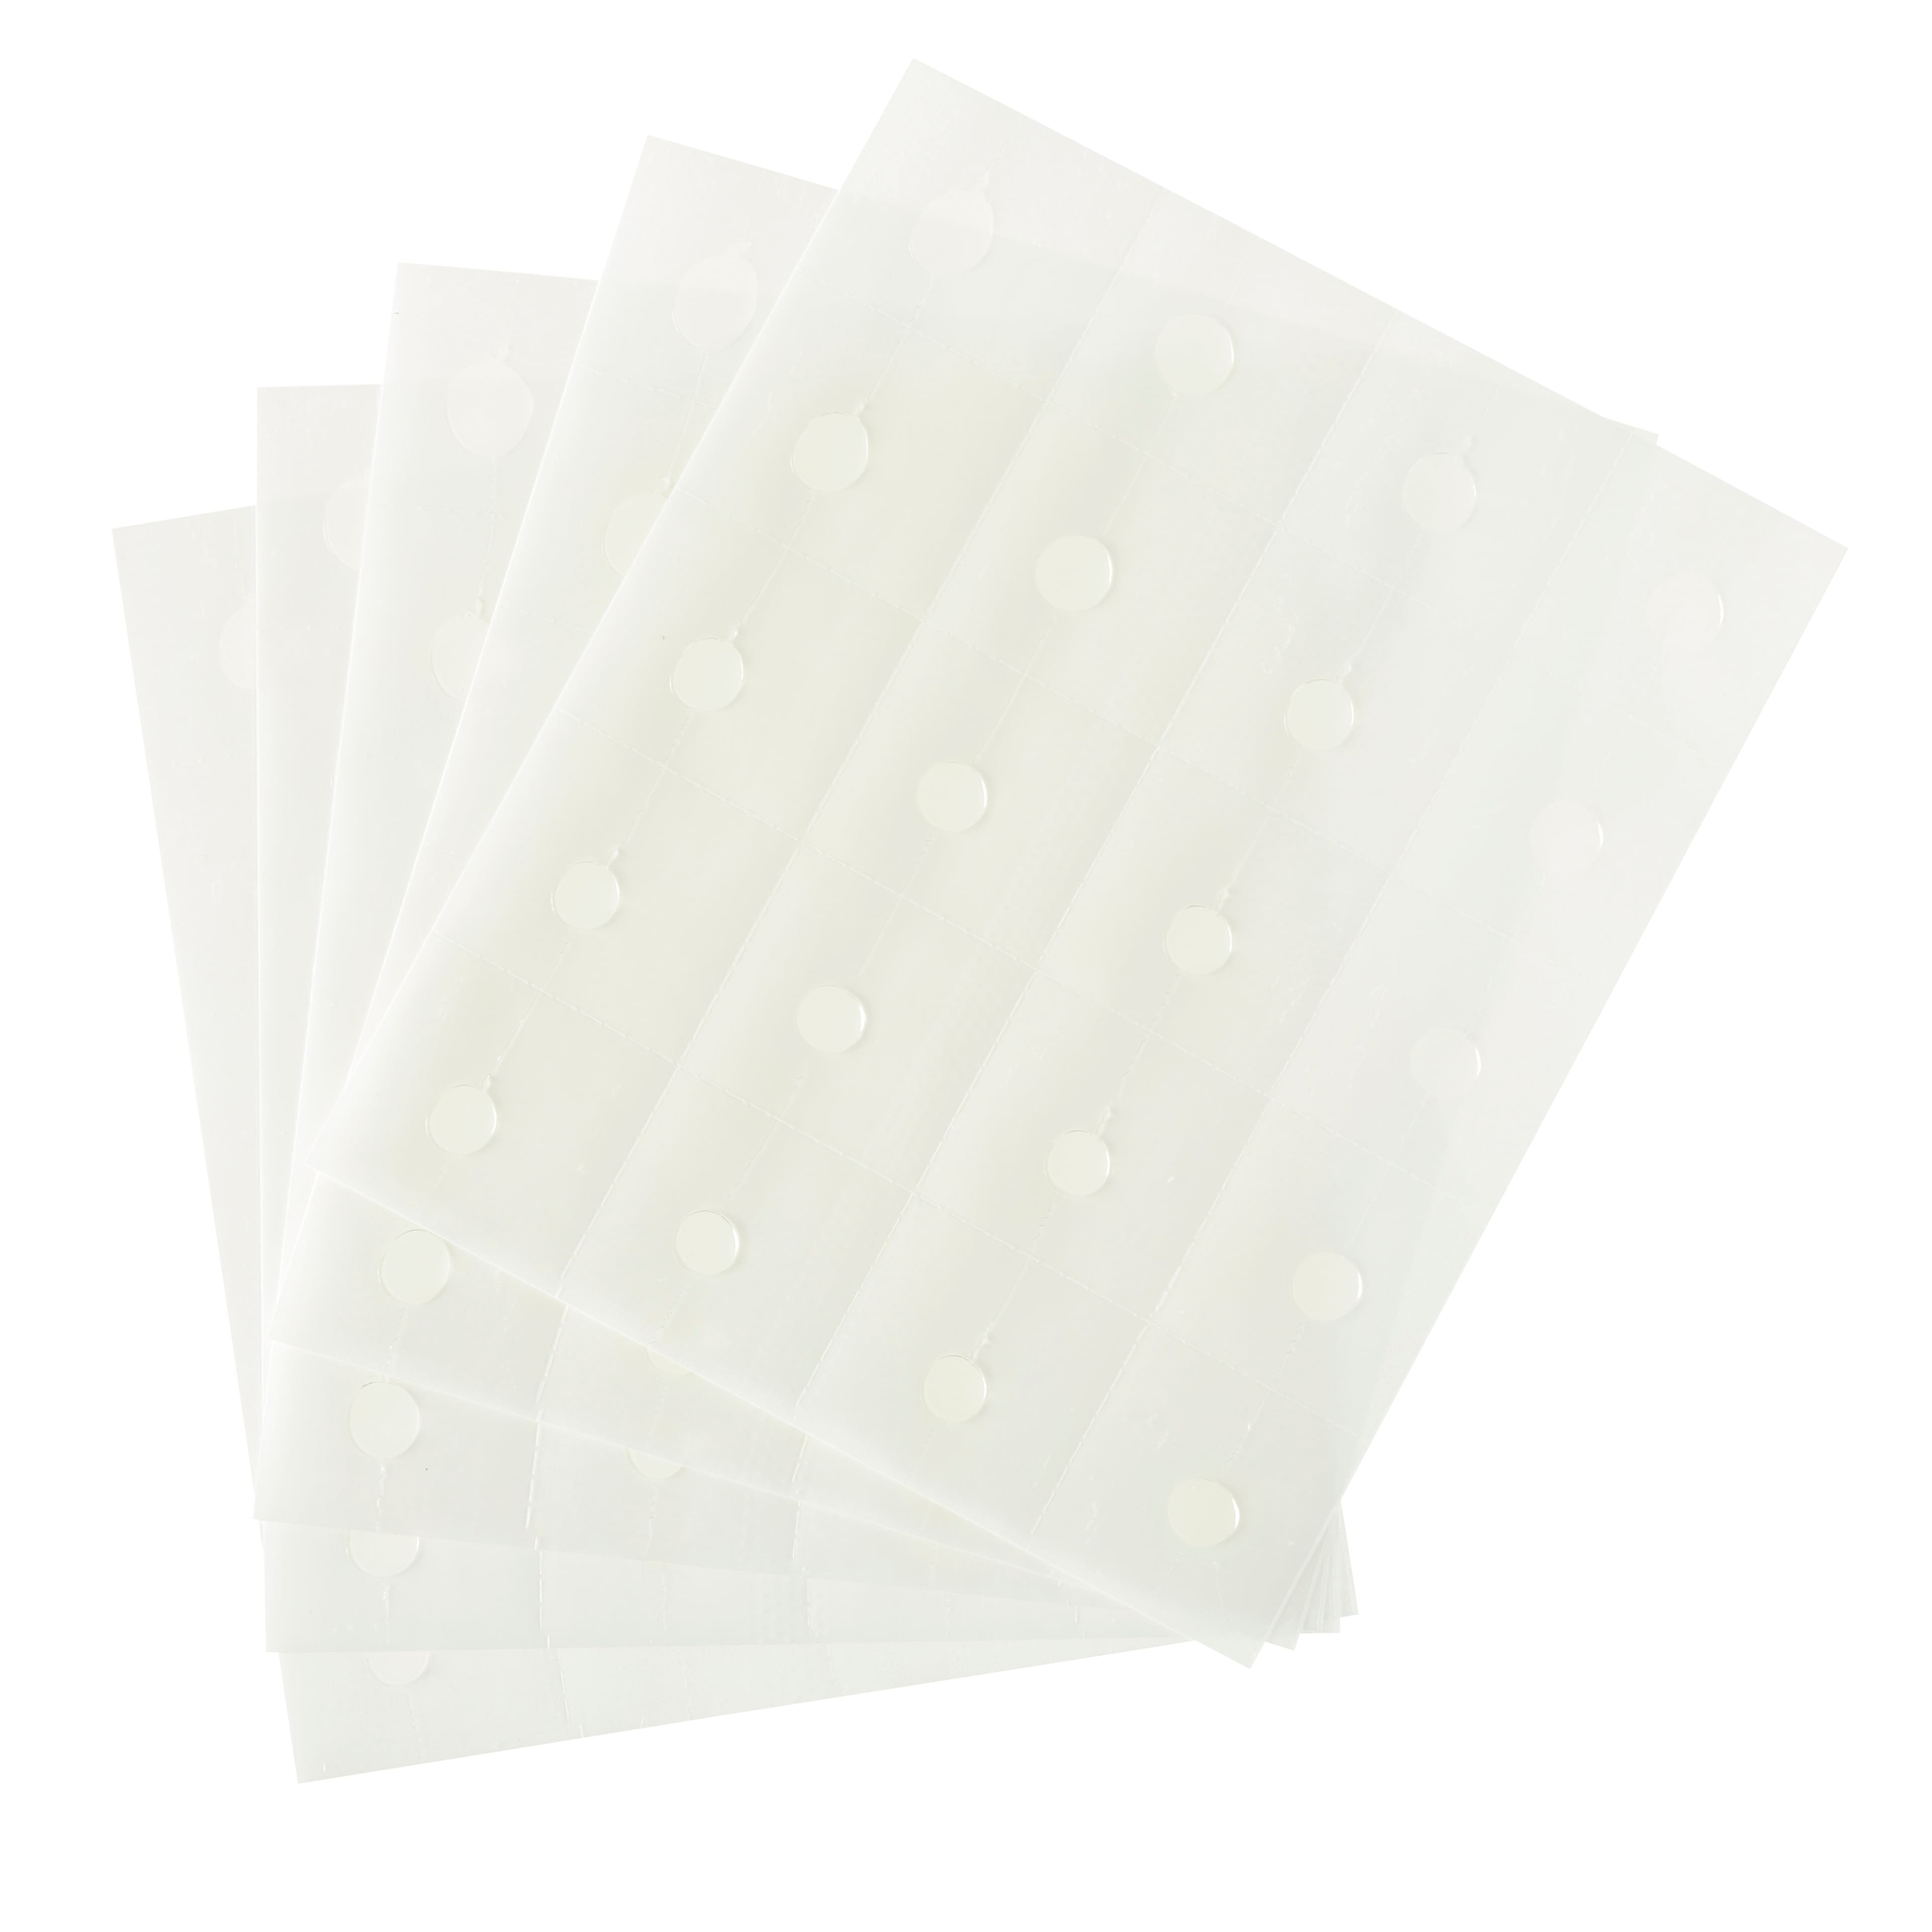 Clear Acetate Sheets by Recollections 6 x 6 | Michaels